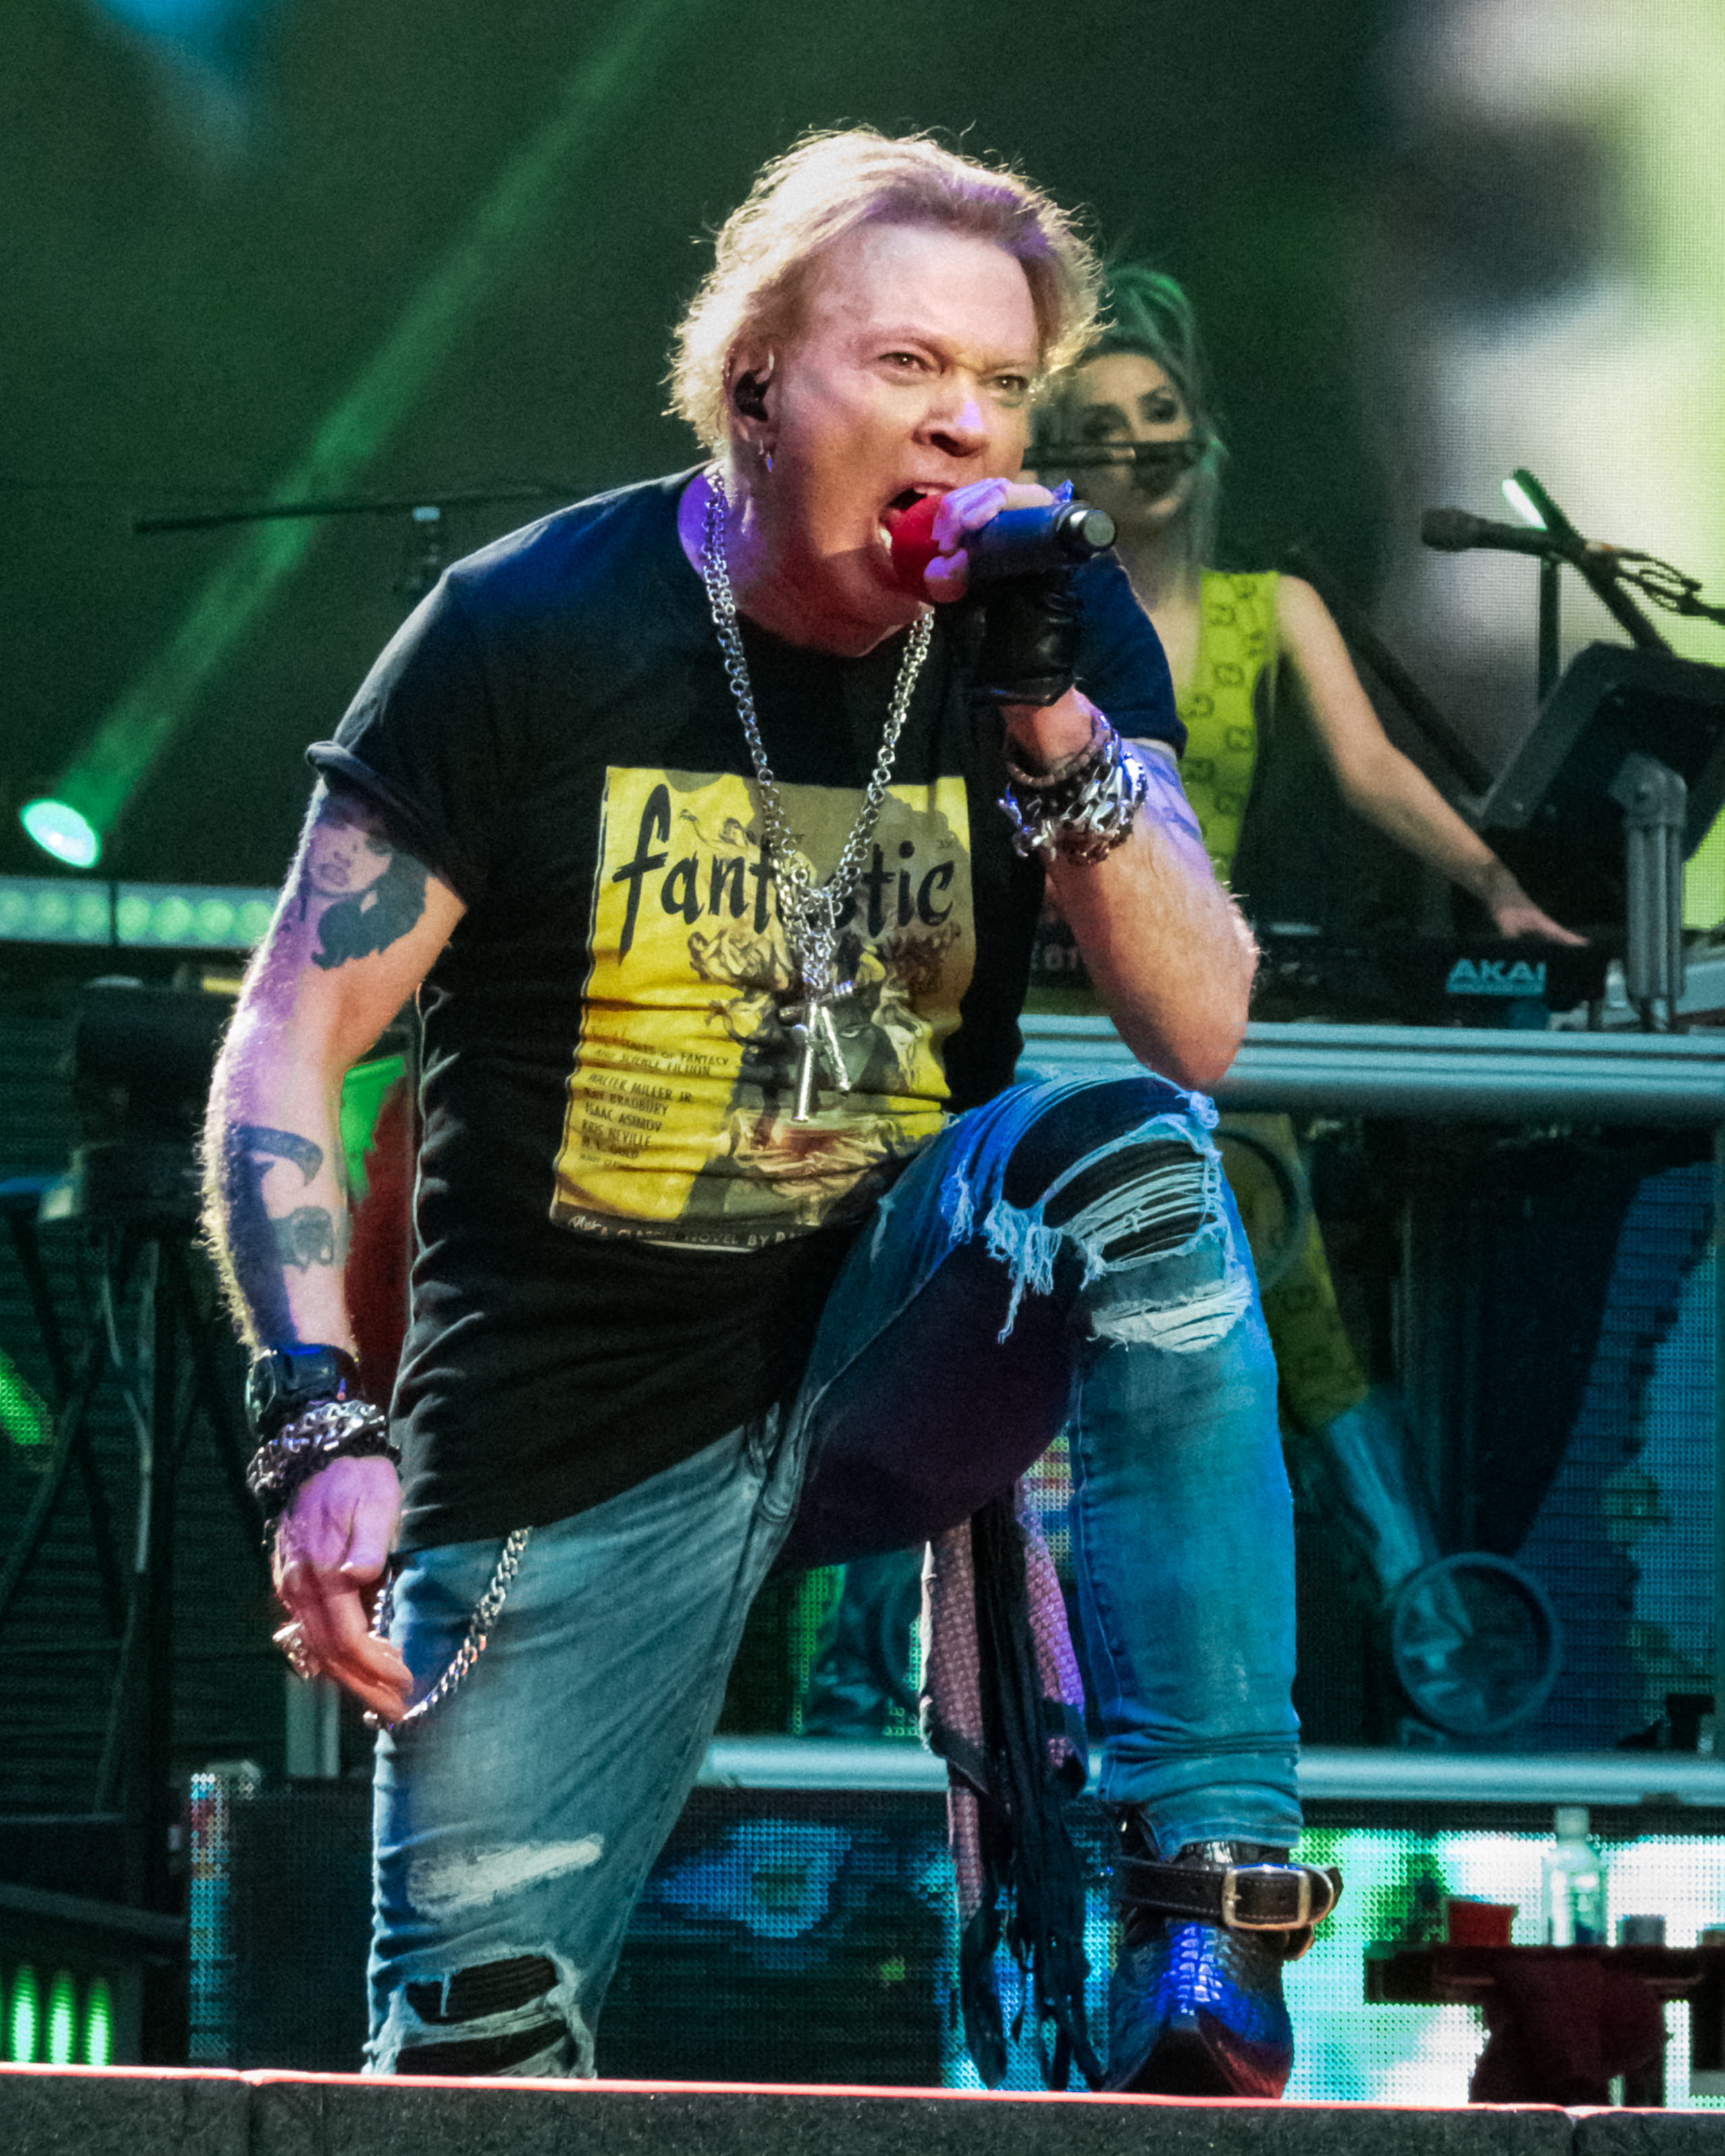 Famely Storck Froced Sex - Axl Rose - Wikipedia